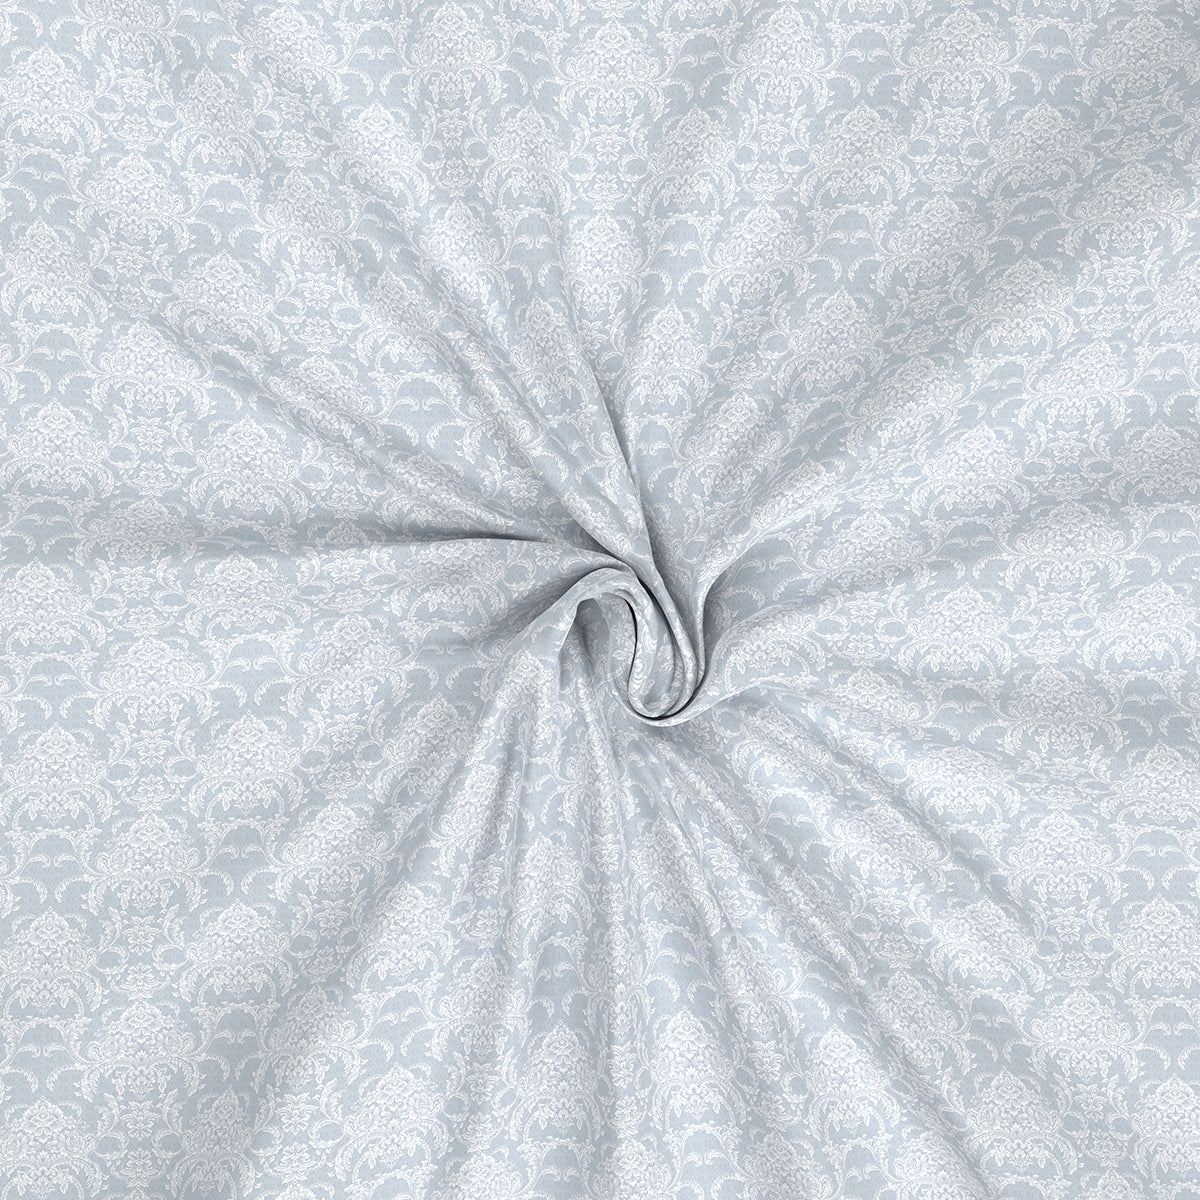 Hermosa Exotic Bouquet Damask Floral Grey Bed Sheet with Pillow Case